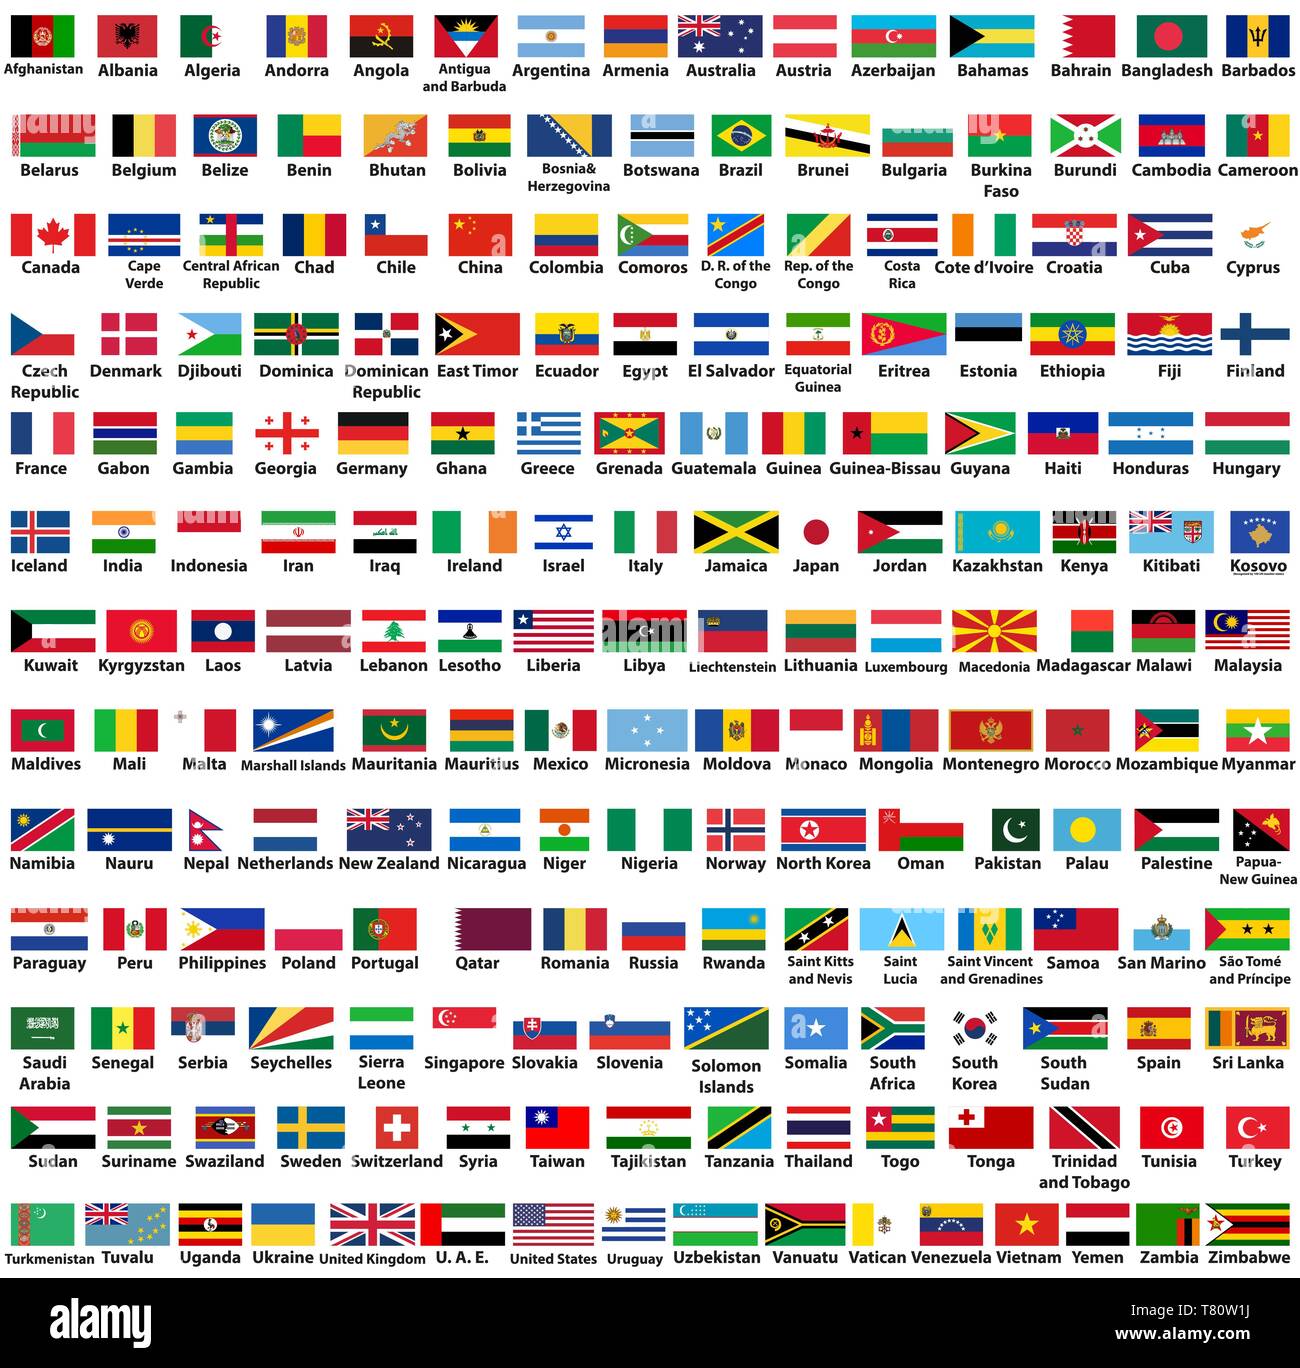 Alphabetical Order Flags Of The World With Names If You Try To Typ